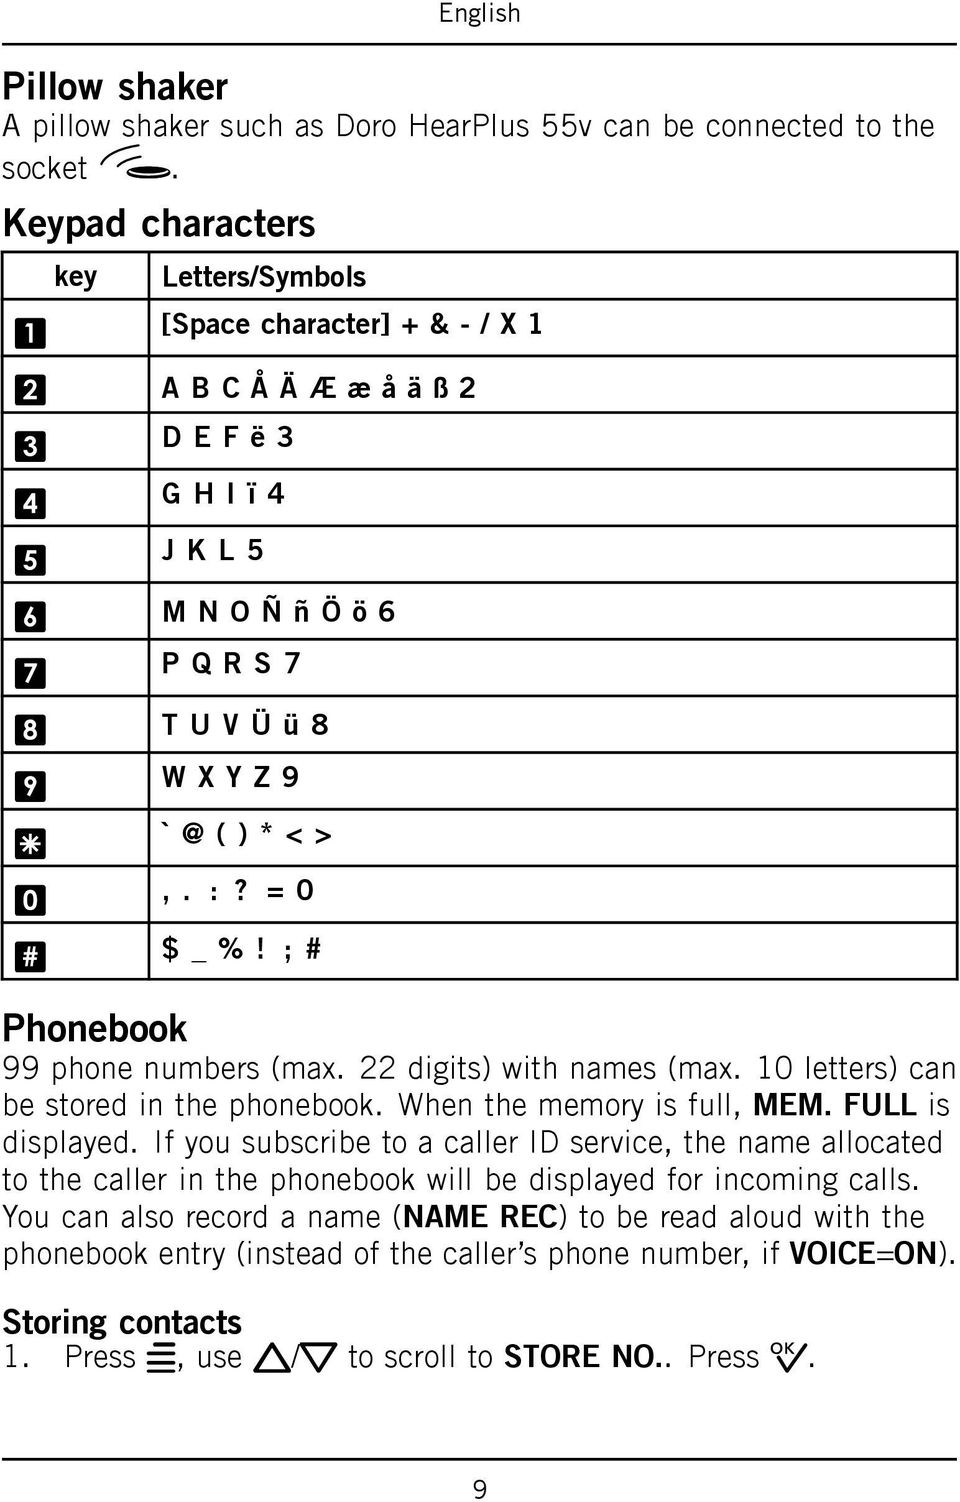 < >,. :? = 0 $ _ %! ; # Phonebook 99 phone numbers (max. 22 digits) with names (max. 10 letters) can be stored in the phonebook. When the memory is full, MEM. FULL is displayed.